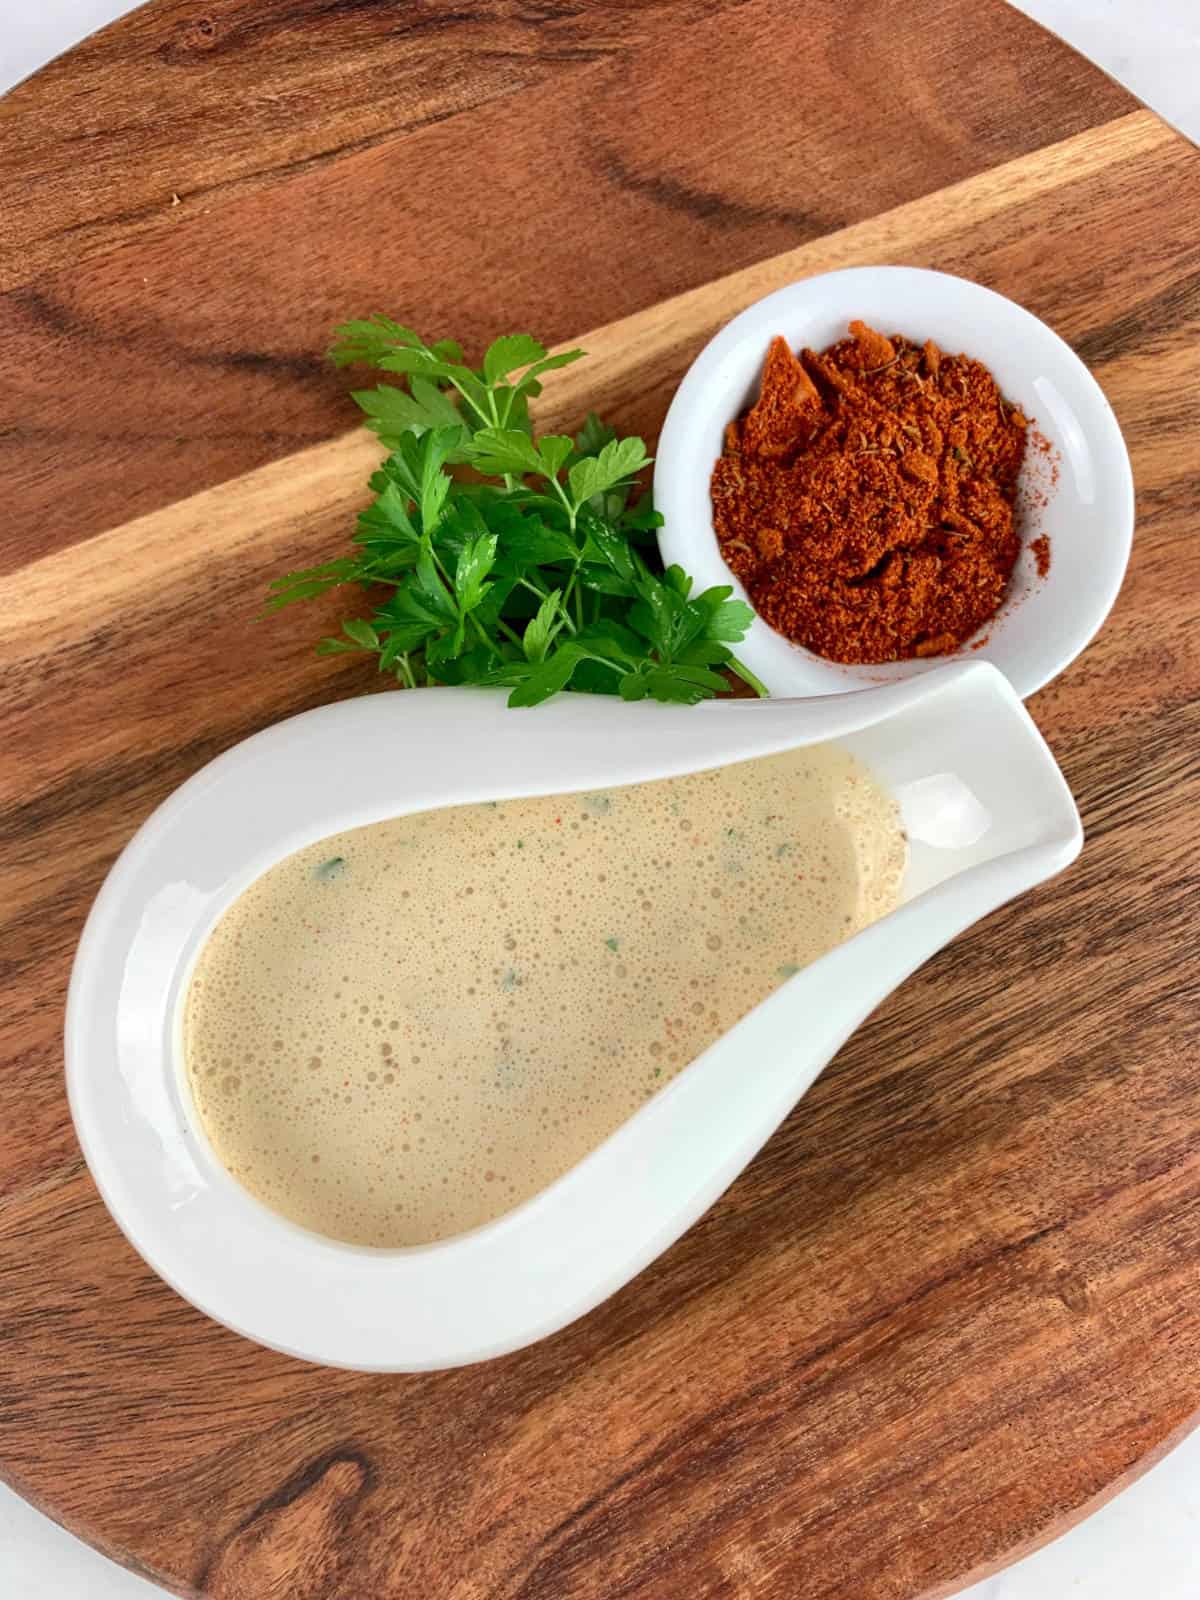 CAJUN SALAD DRESSING IN A WHITE BOWL WITH CAJUN SPICE & PARSLEY GARNISH ON A WOODEN BOARD